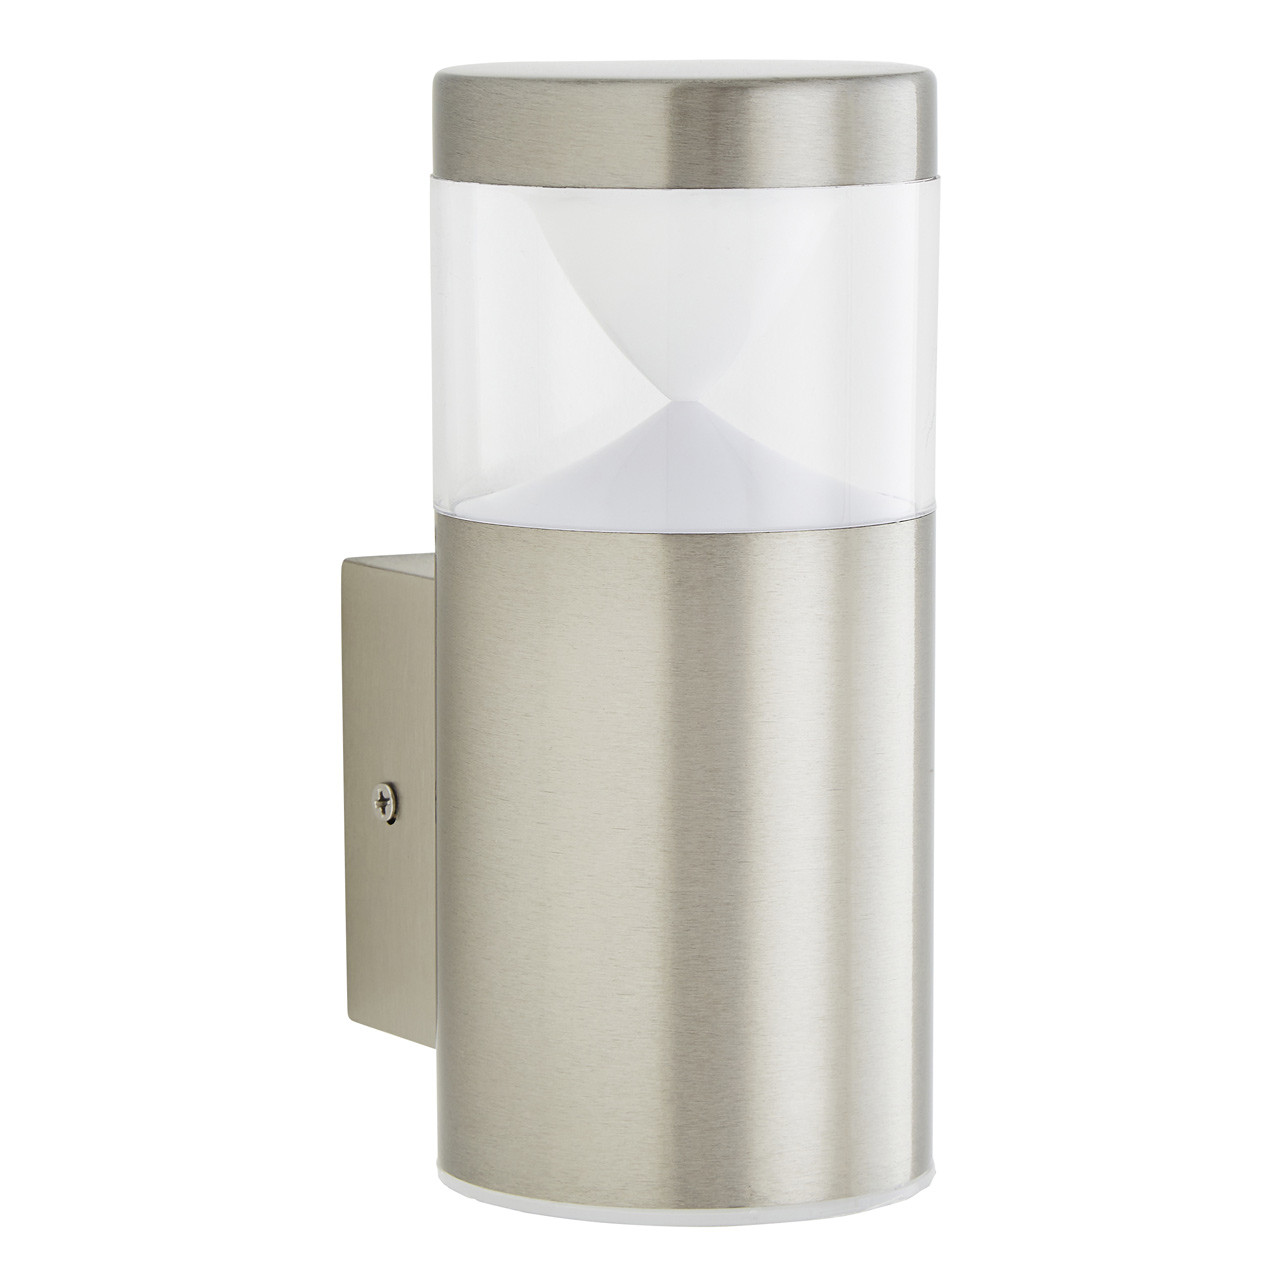 Zink POLLUX 4W LED Outdoor Wall Lantern Stainless Steel